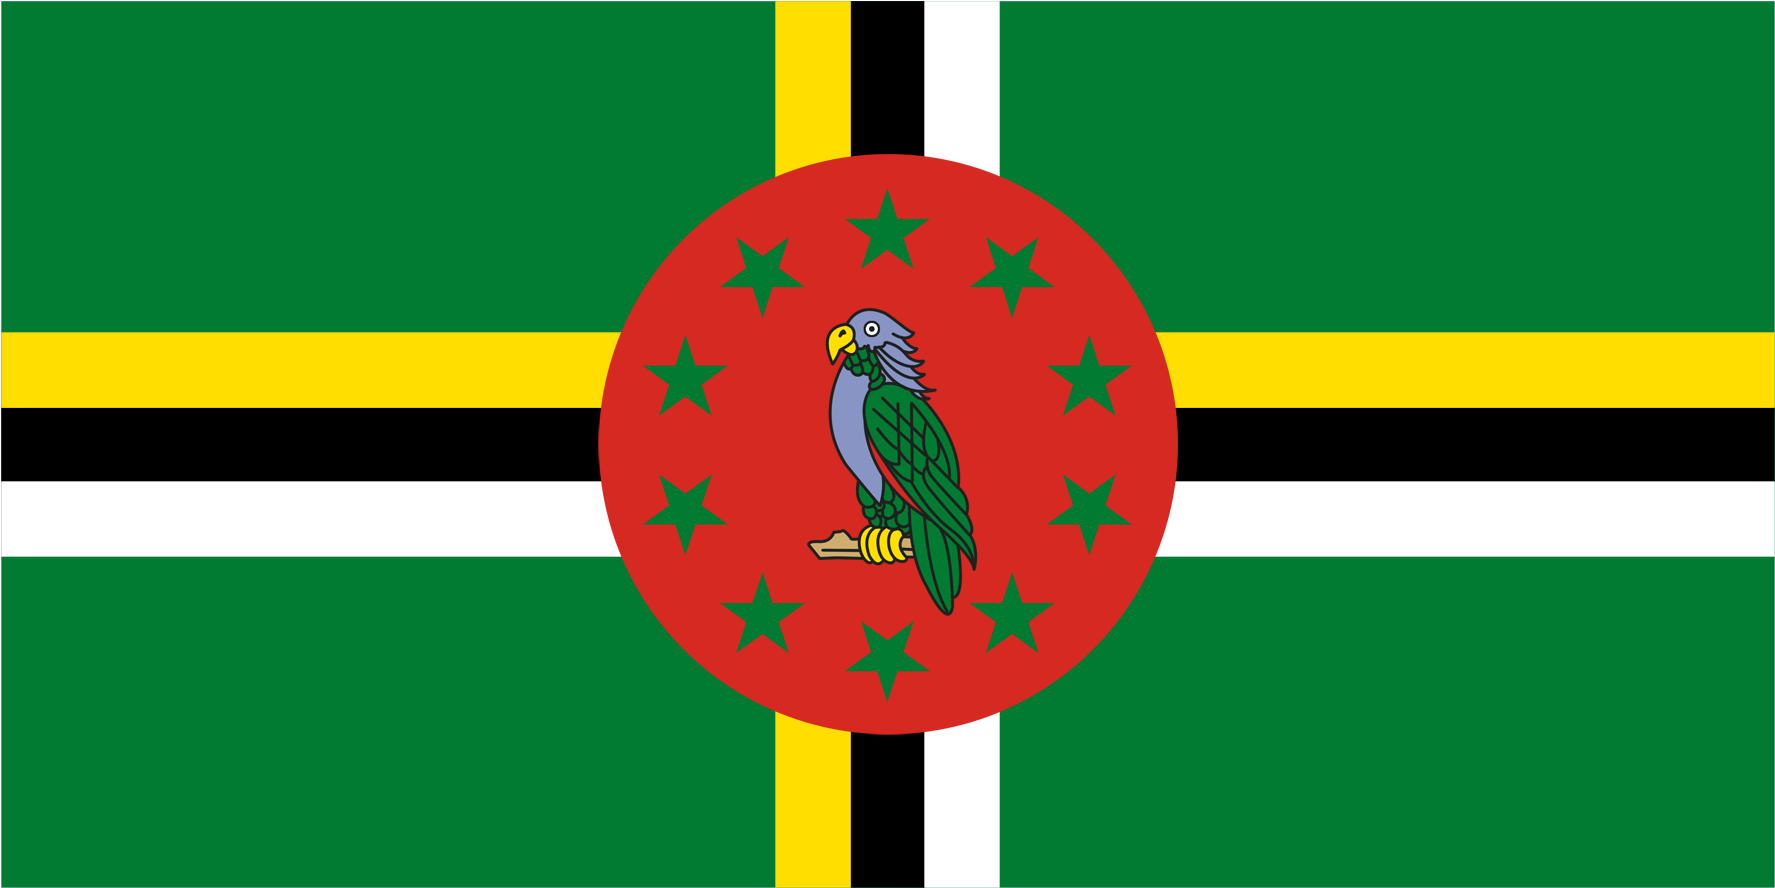 A Flag With A Bird In The Center